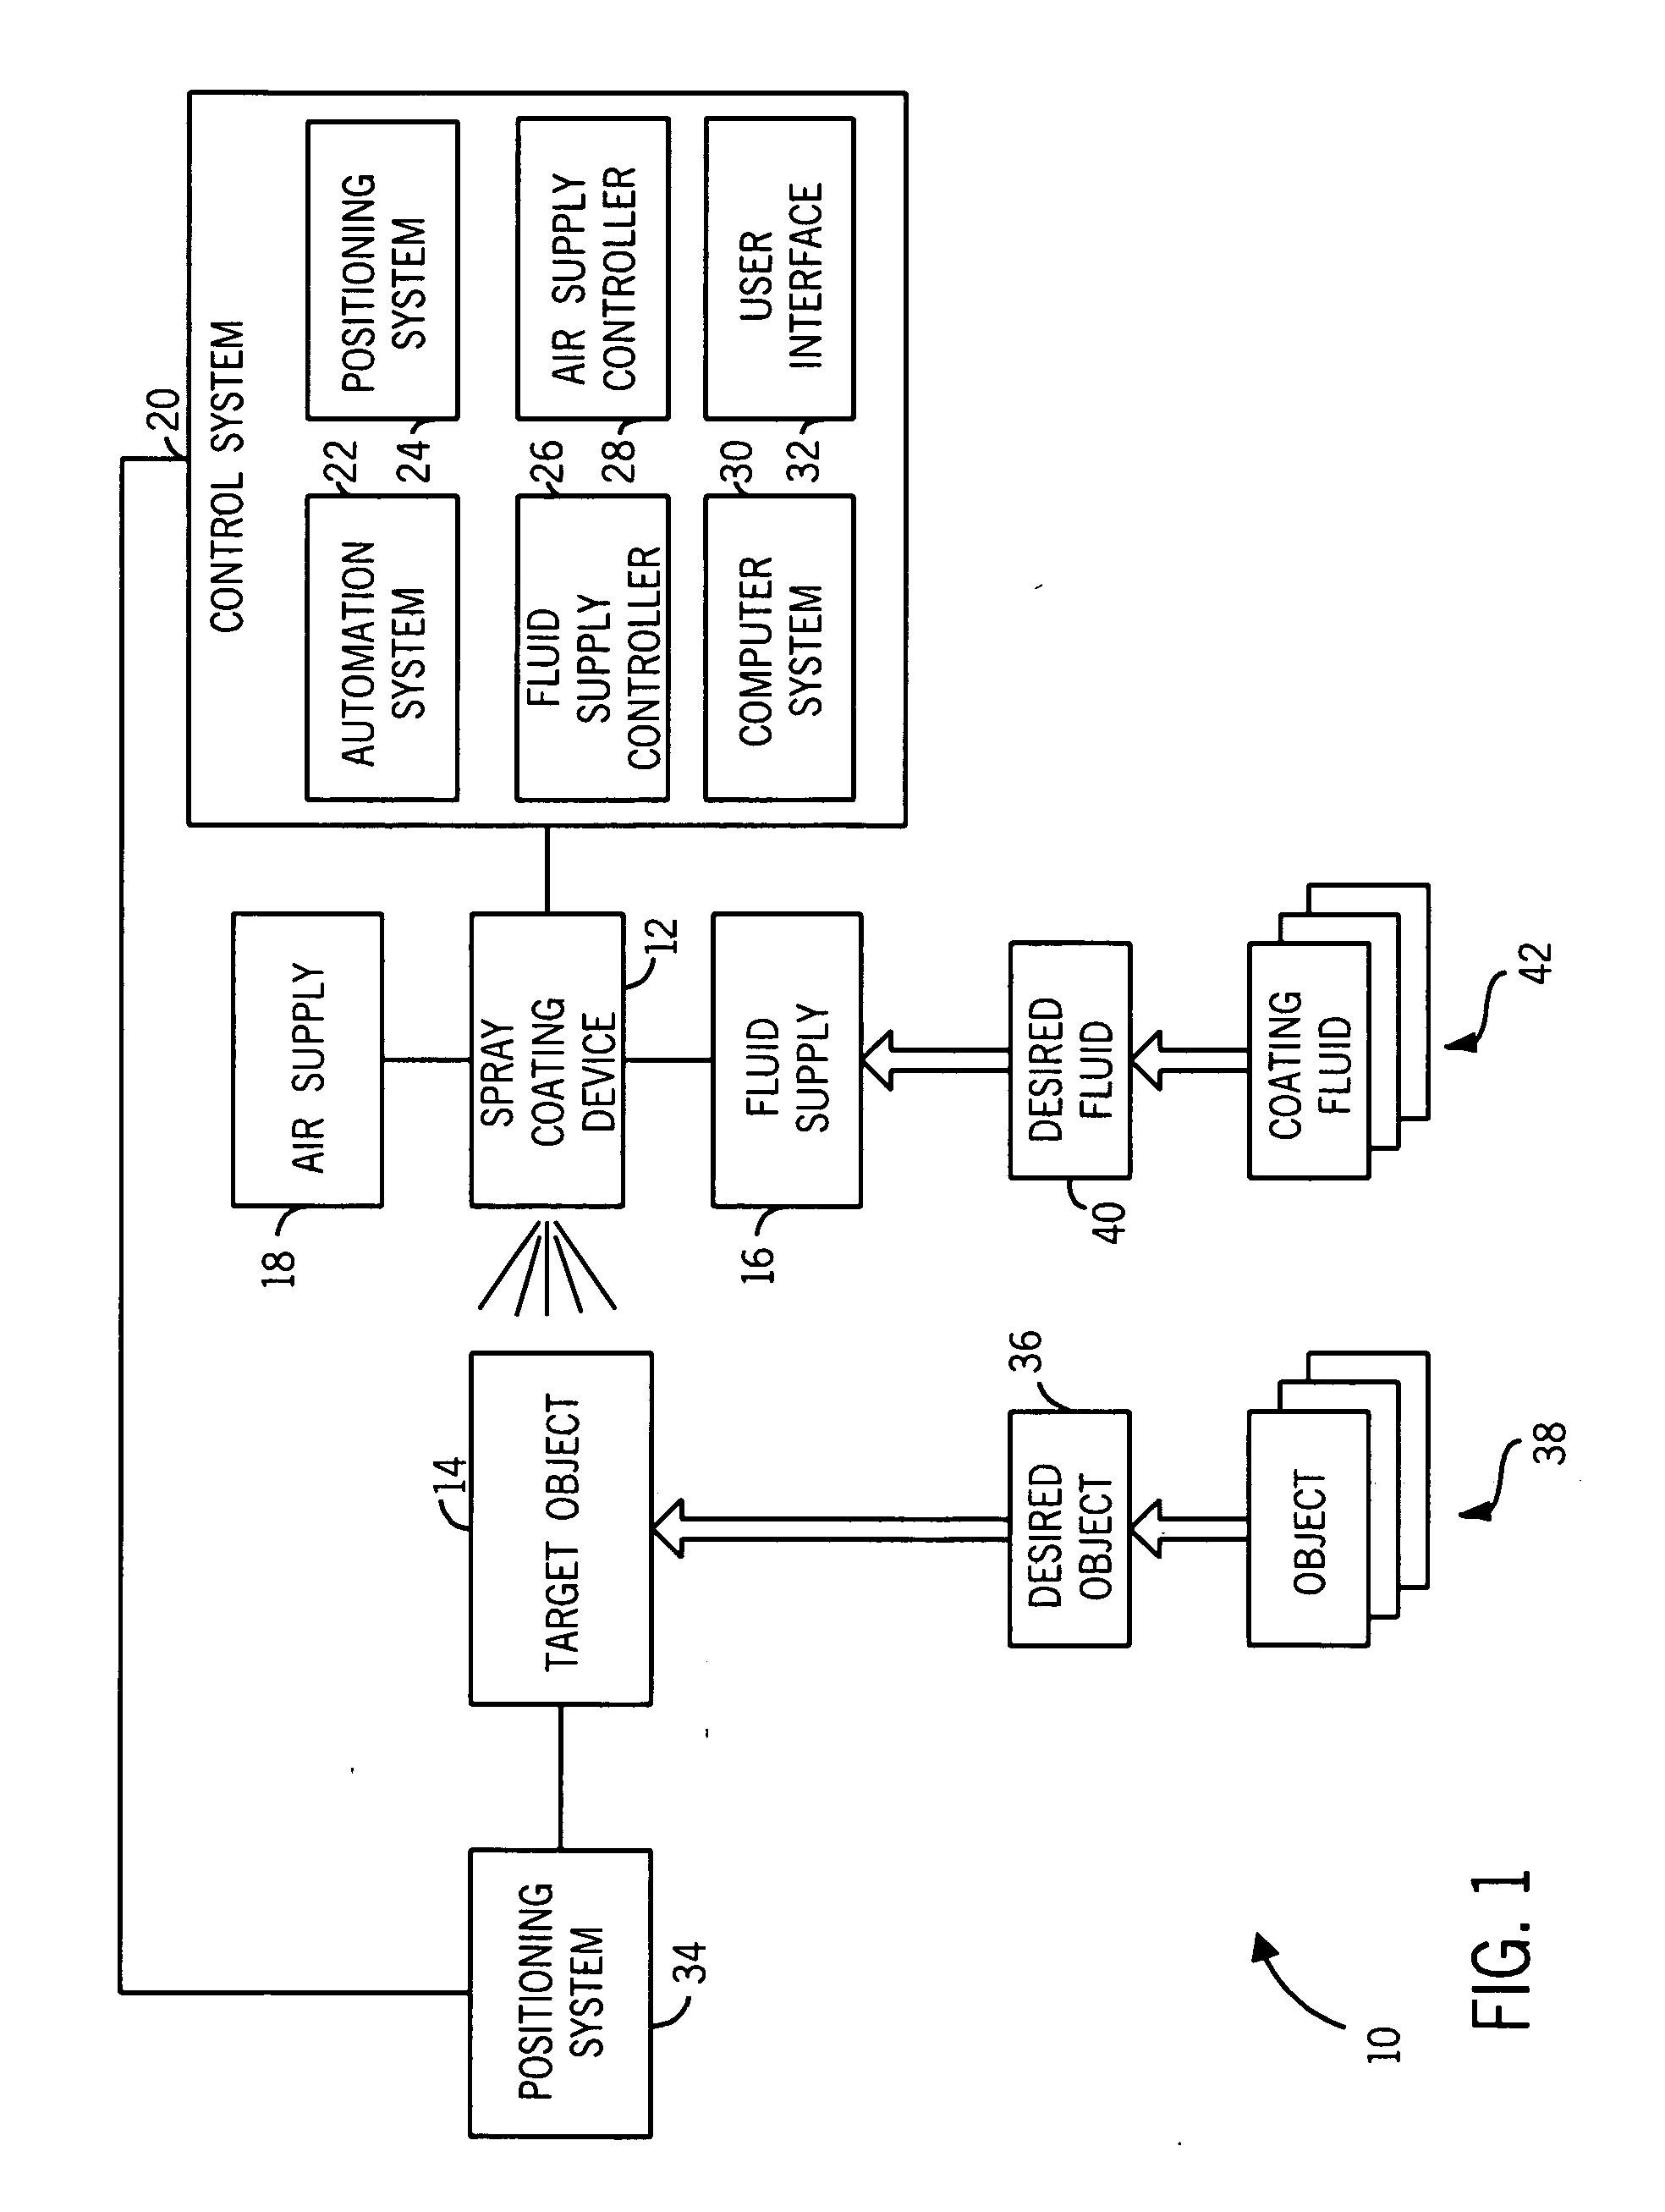 System and method having arm with cable passage through joint to infrared lamp